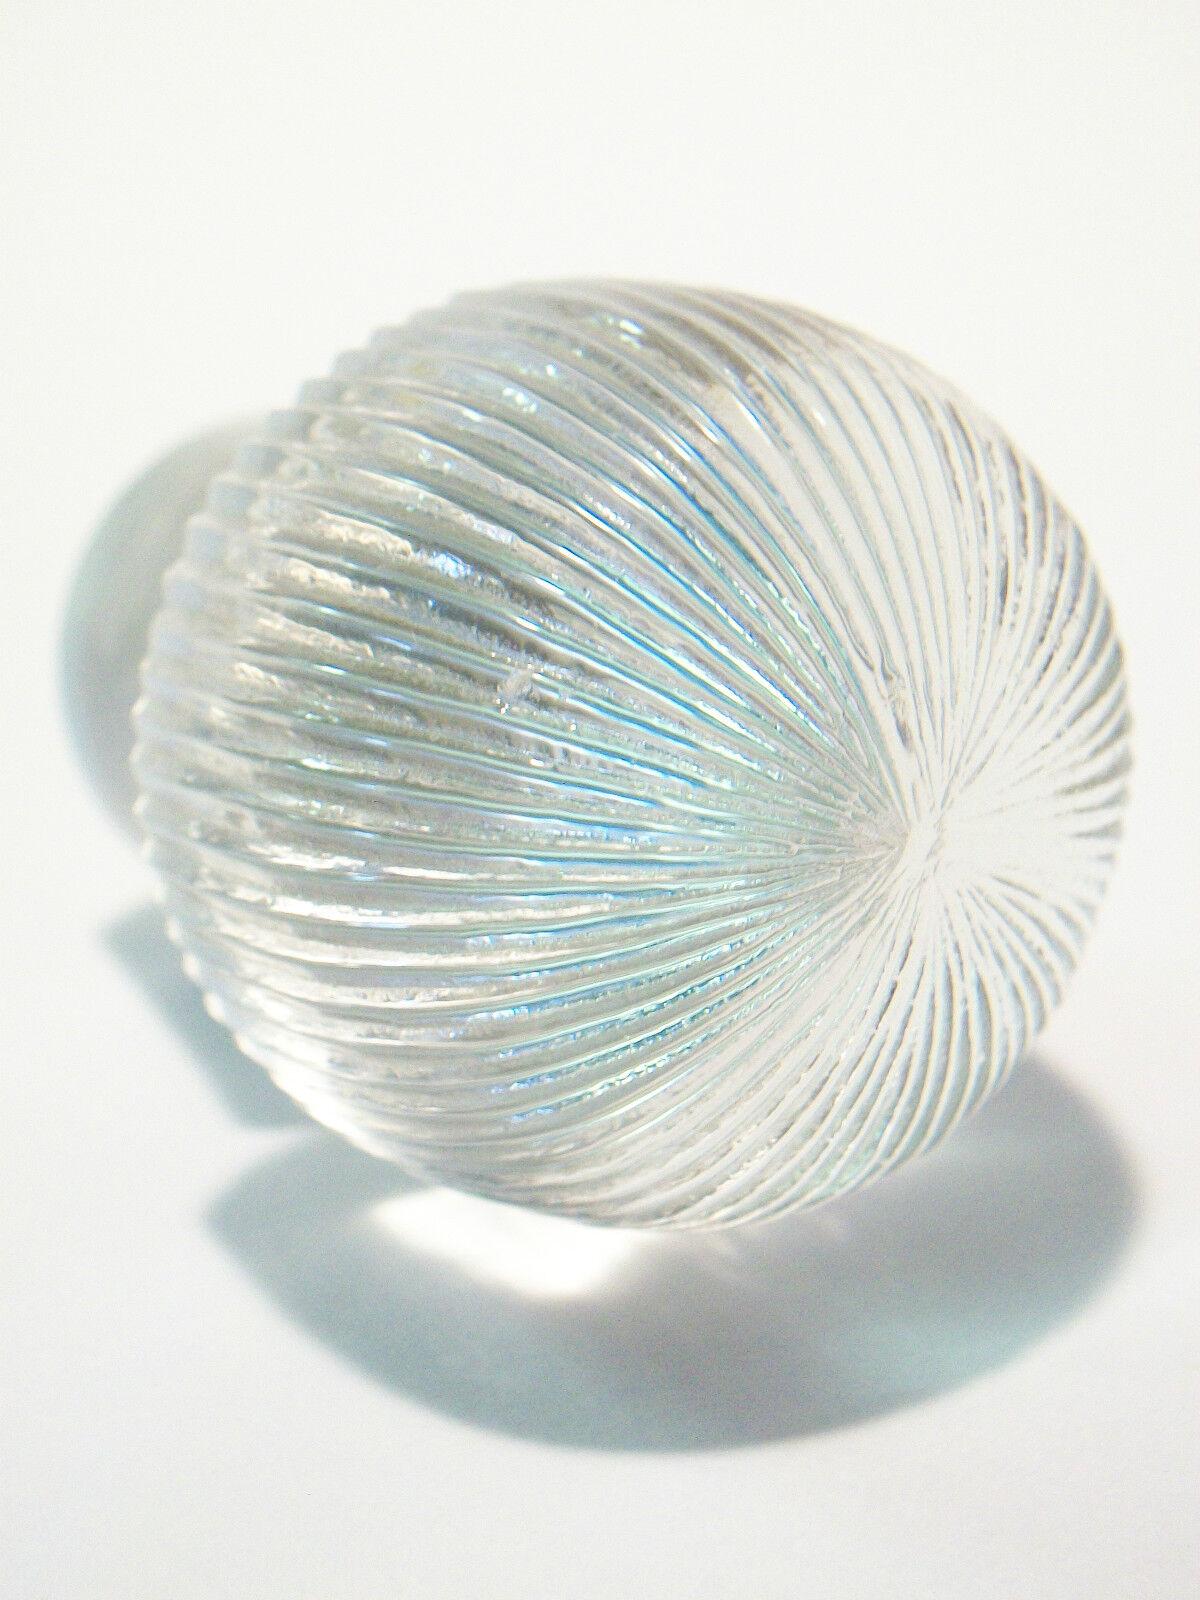 RENE LALIQUE - Antique clear glass mushroom shaped stopper for either a decanter or a perfume bottle - number '98' on the base - France - early 20th century.  This is an original R. Lalique stopper - not a modern reproduction!  This item was part of